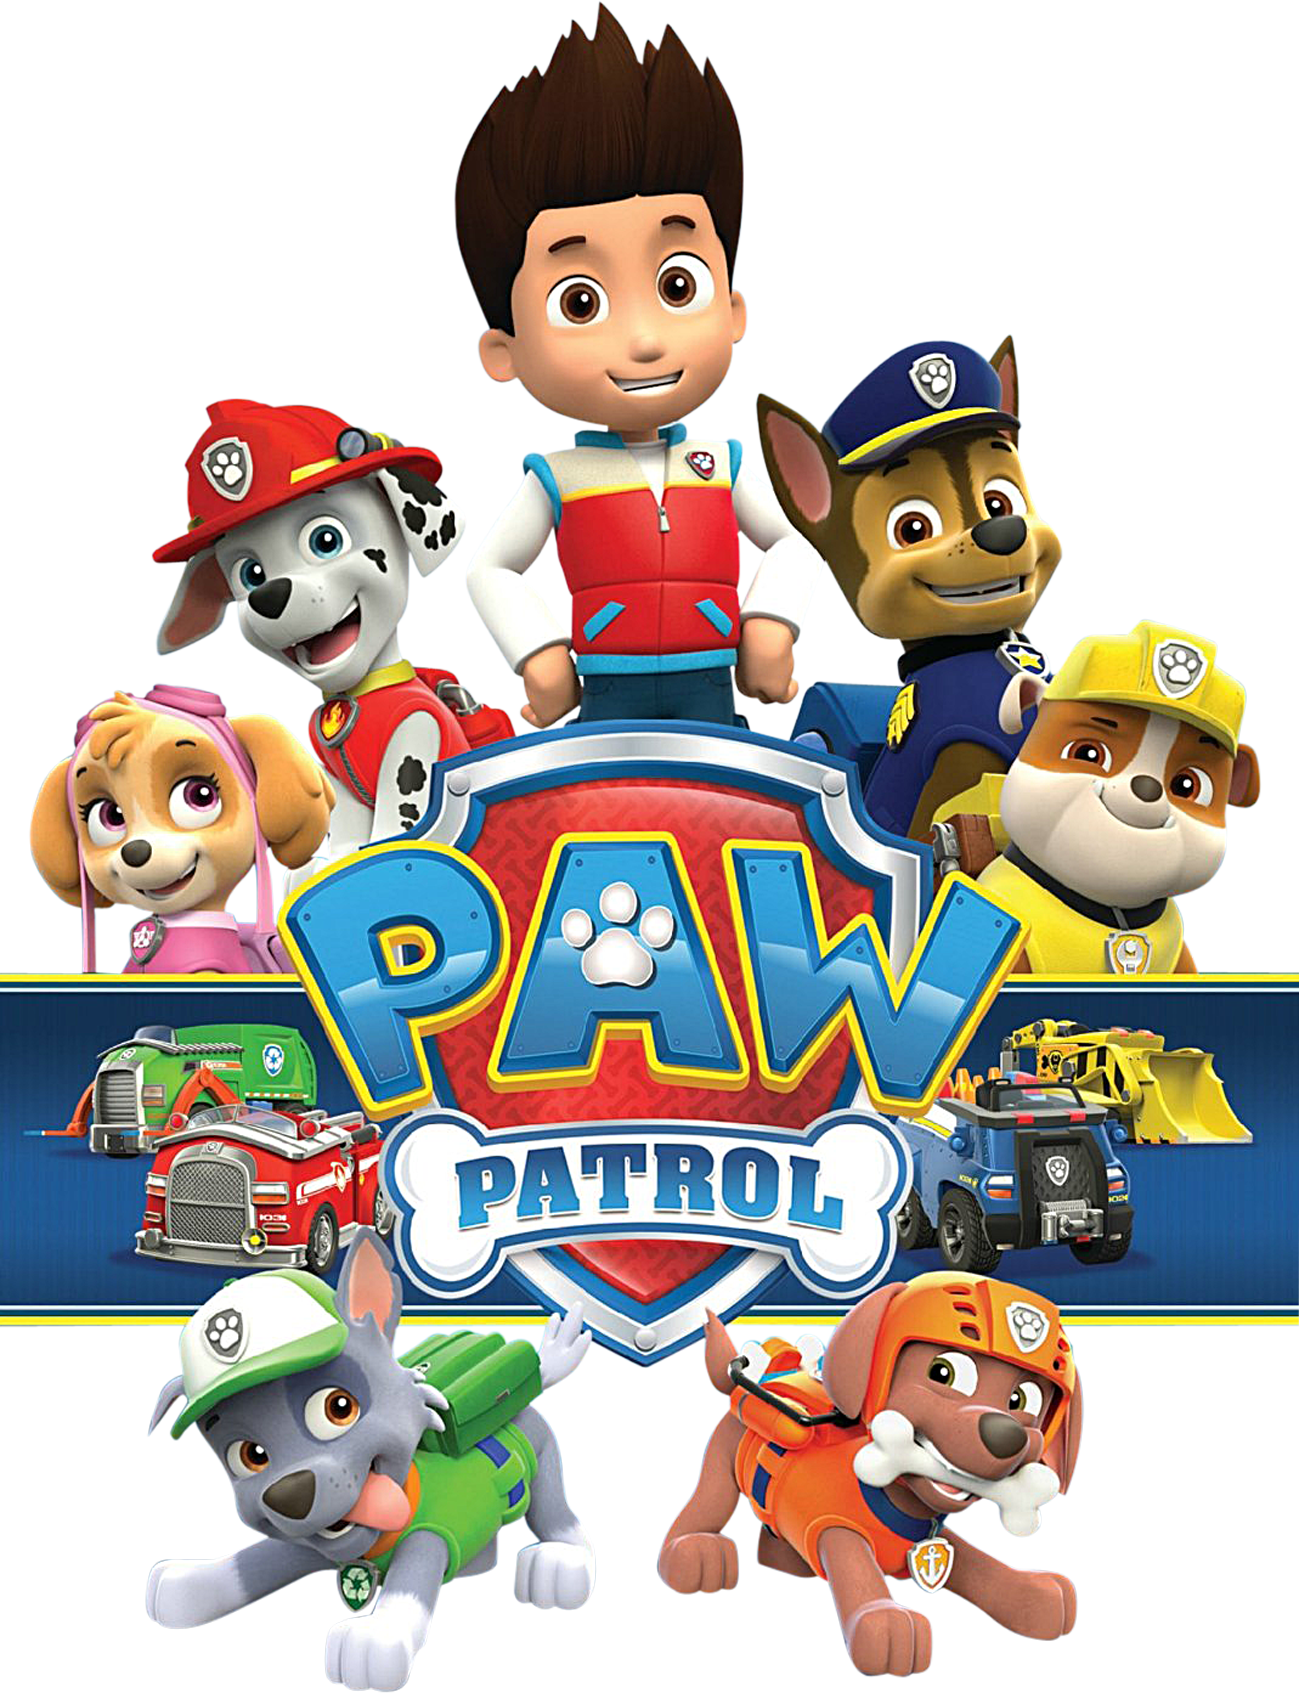 paw patrol clipart 99 PNG 300